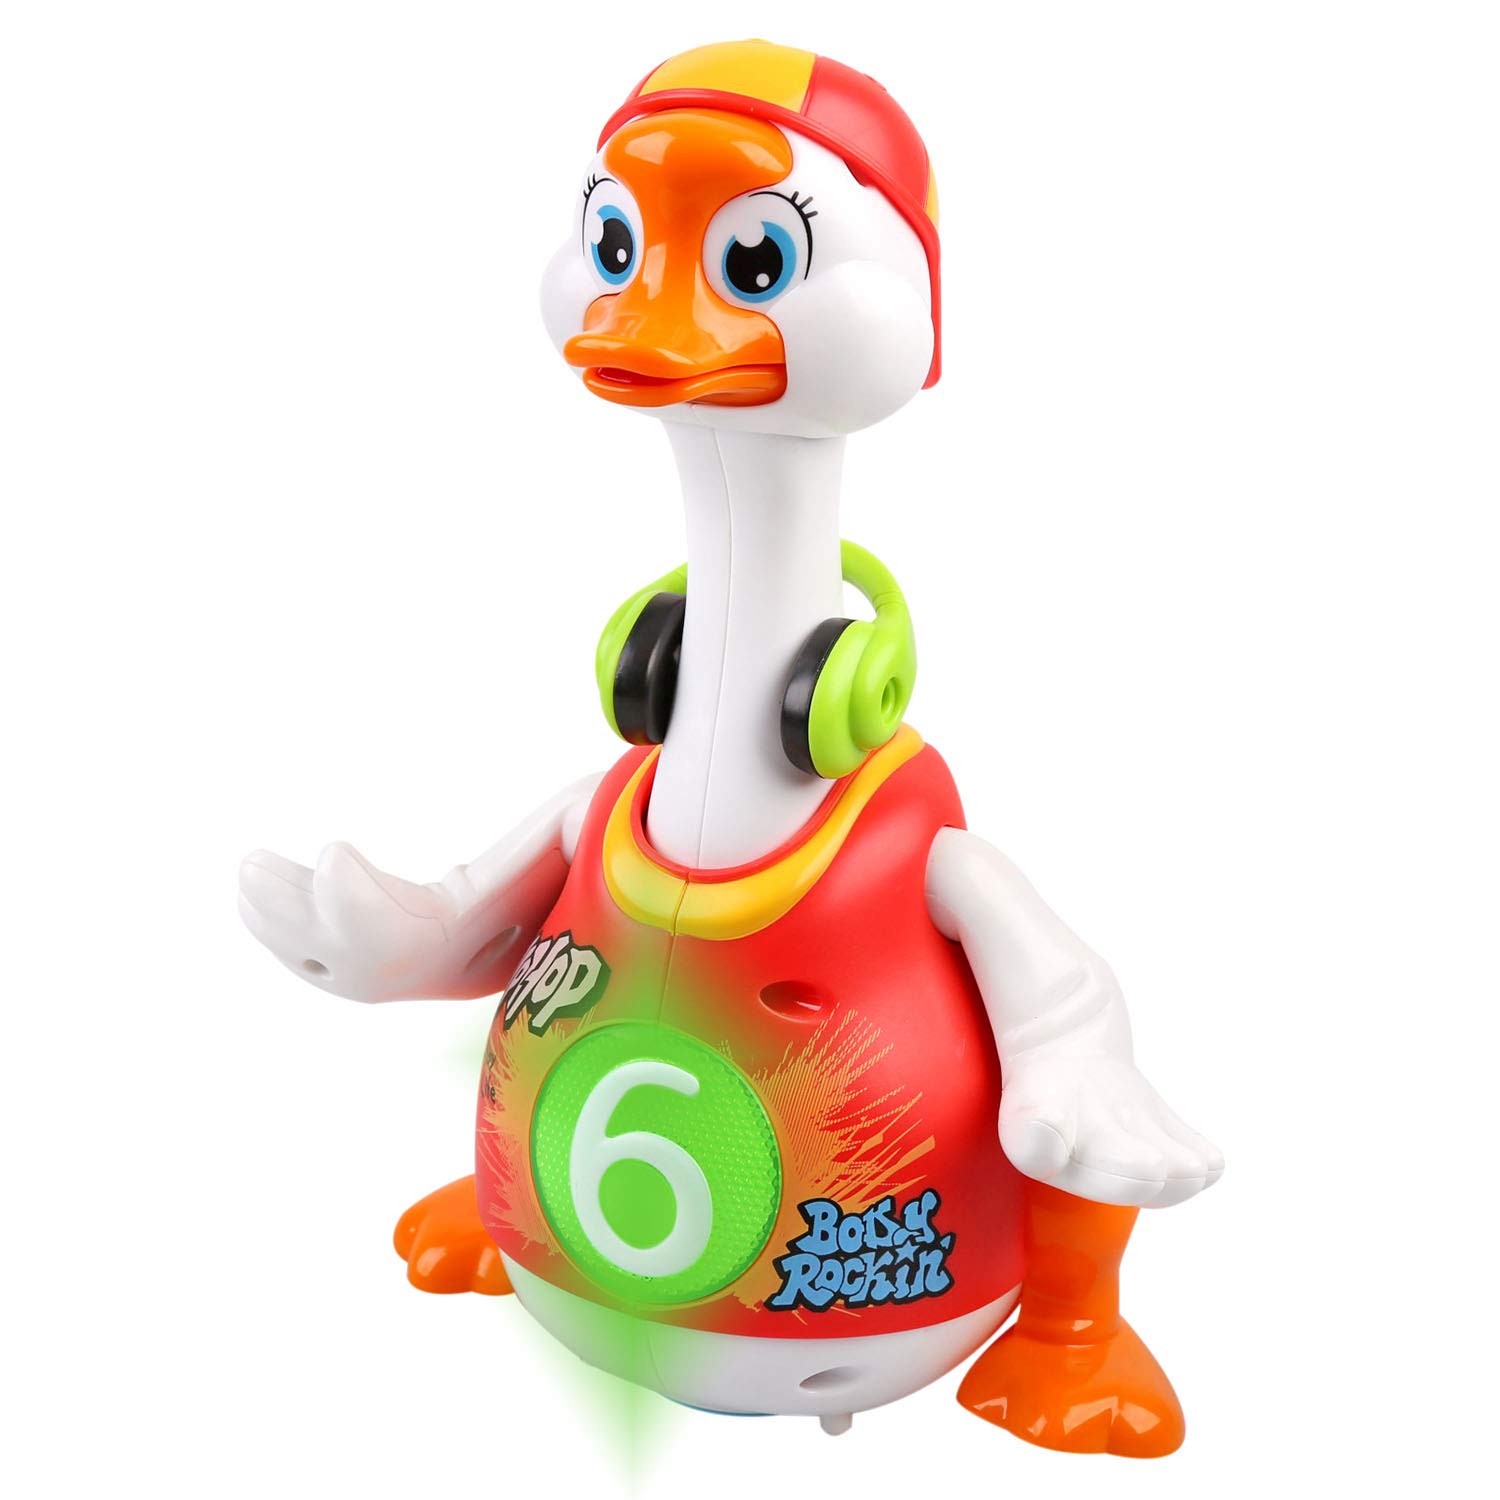 URBAN KIT Dancing Hip Hop Goose Development Musical Toy | Hip Hop Goose Toy | Toddler Dancing | Rapping Duck | Dancing Toy for Toddler | Singing Toys for Toddlers-Red - image 2 of 6